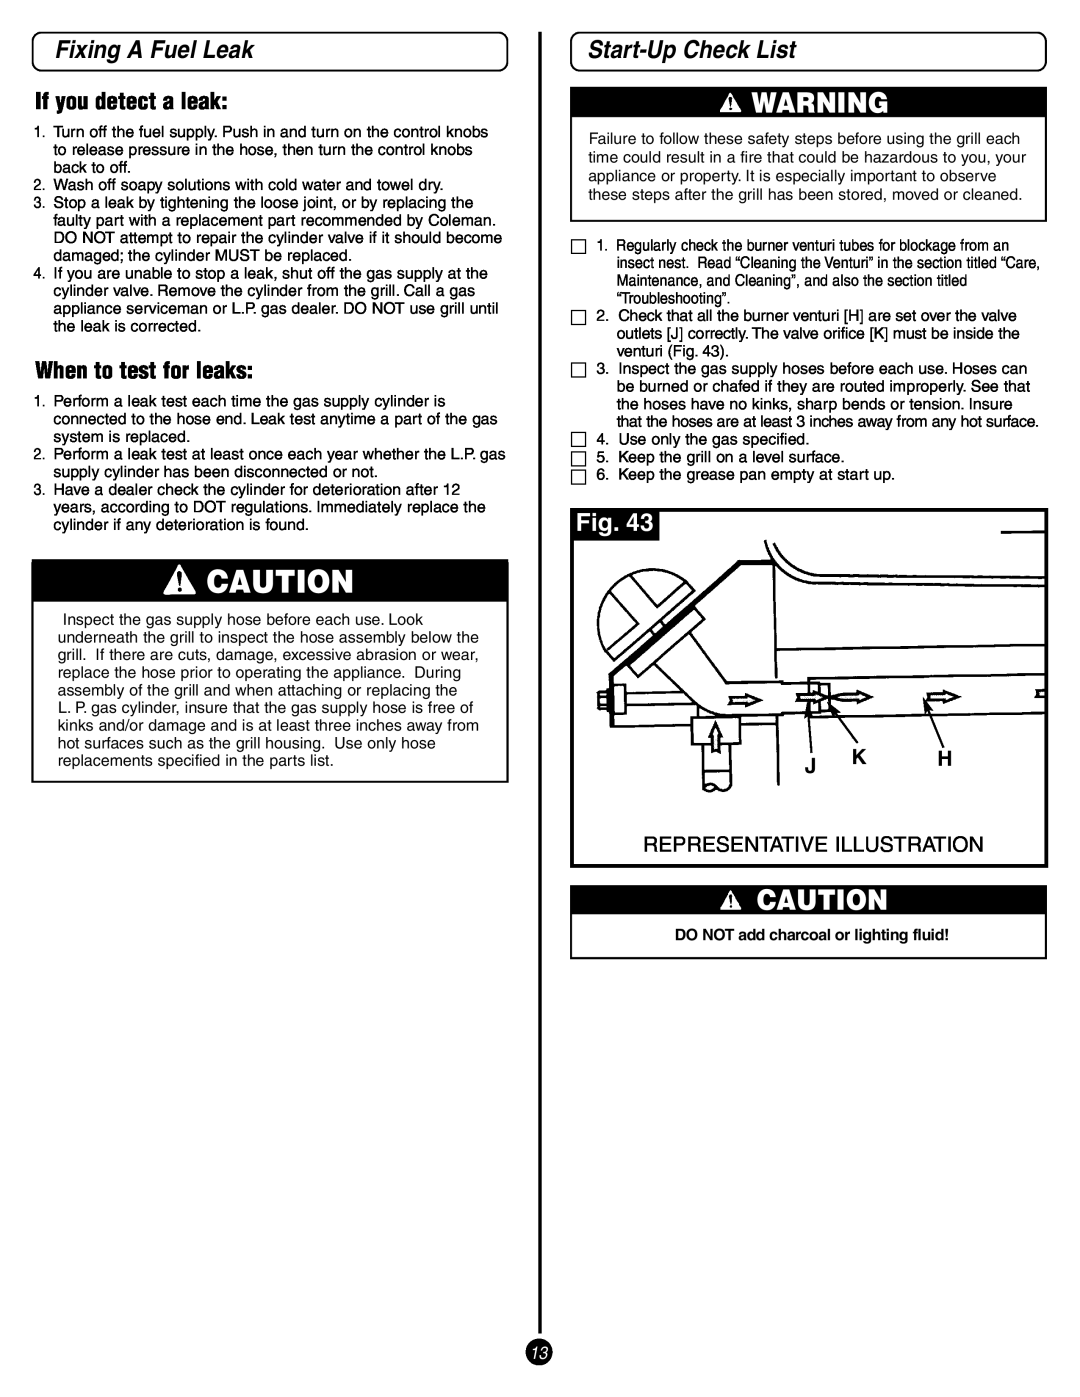 Coleman 9993 manual Fixing A Fuel Leak, Start-UpCheck List, If you detect a leak, When to test for leaks, J K H 